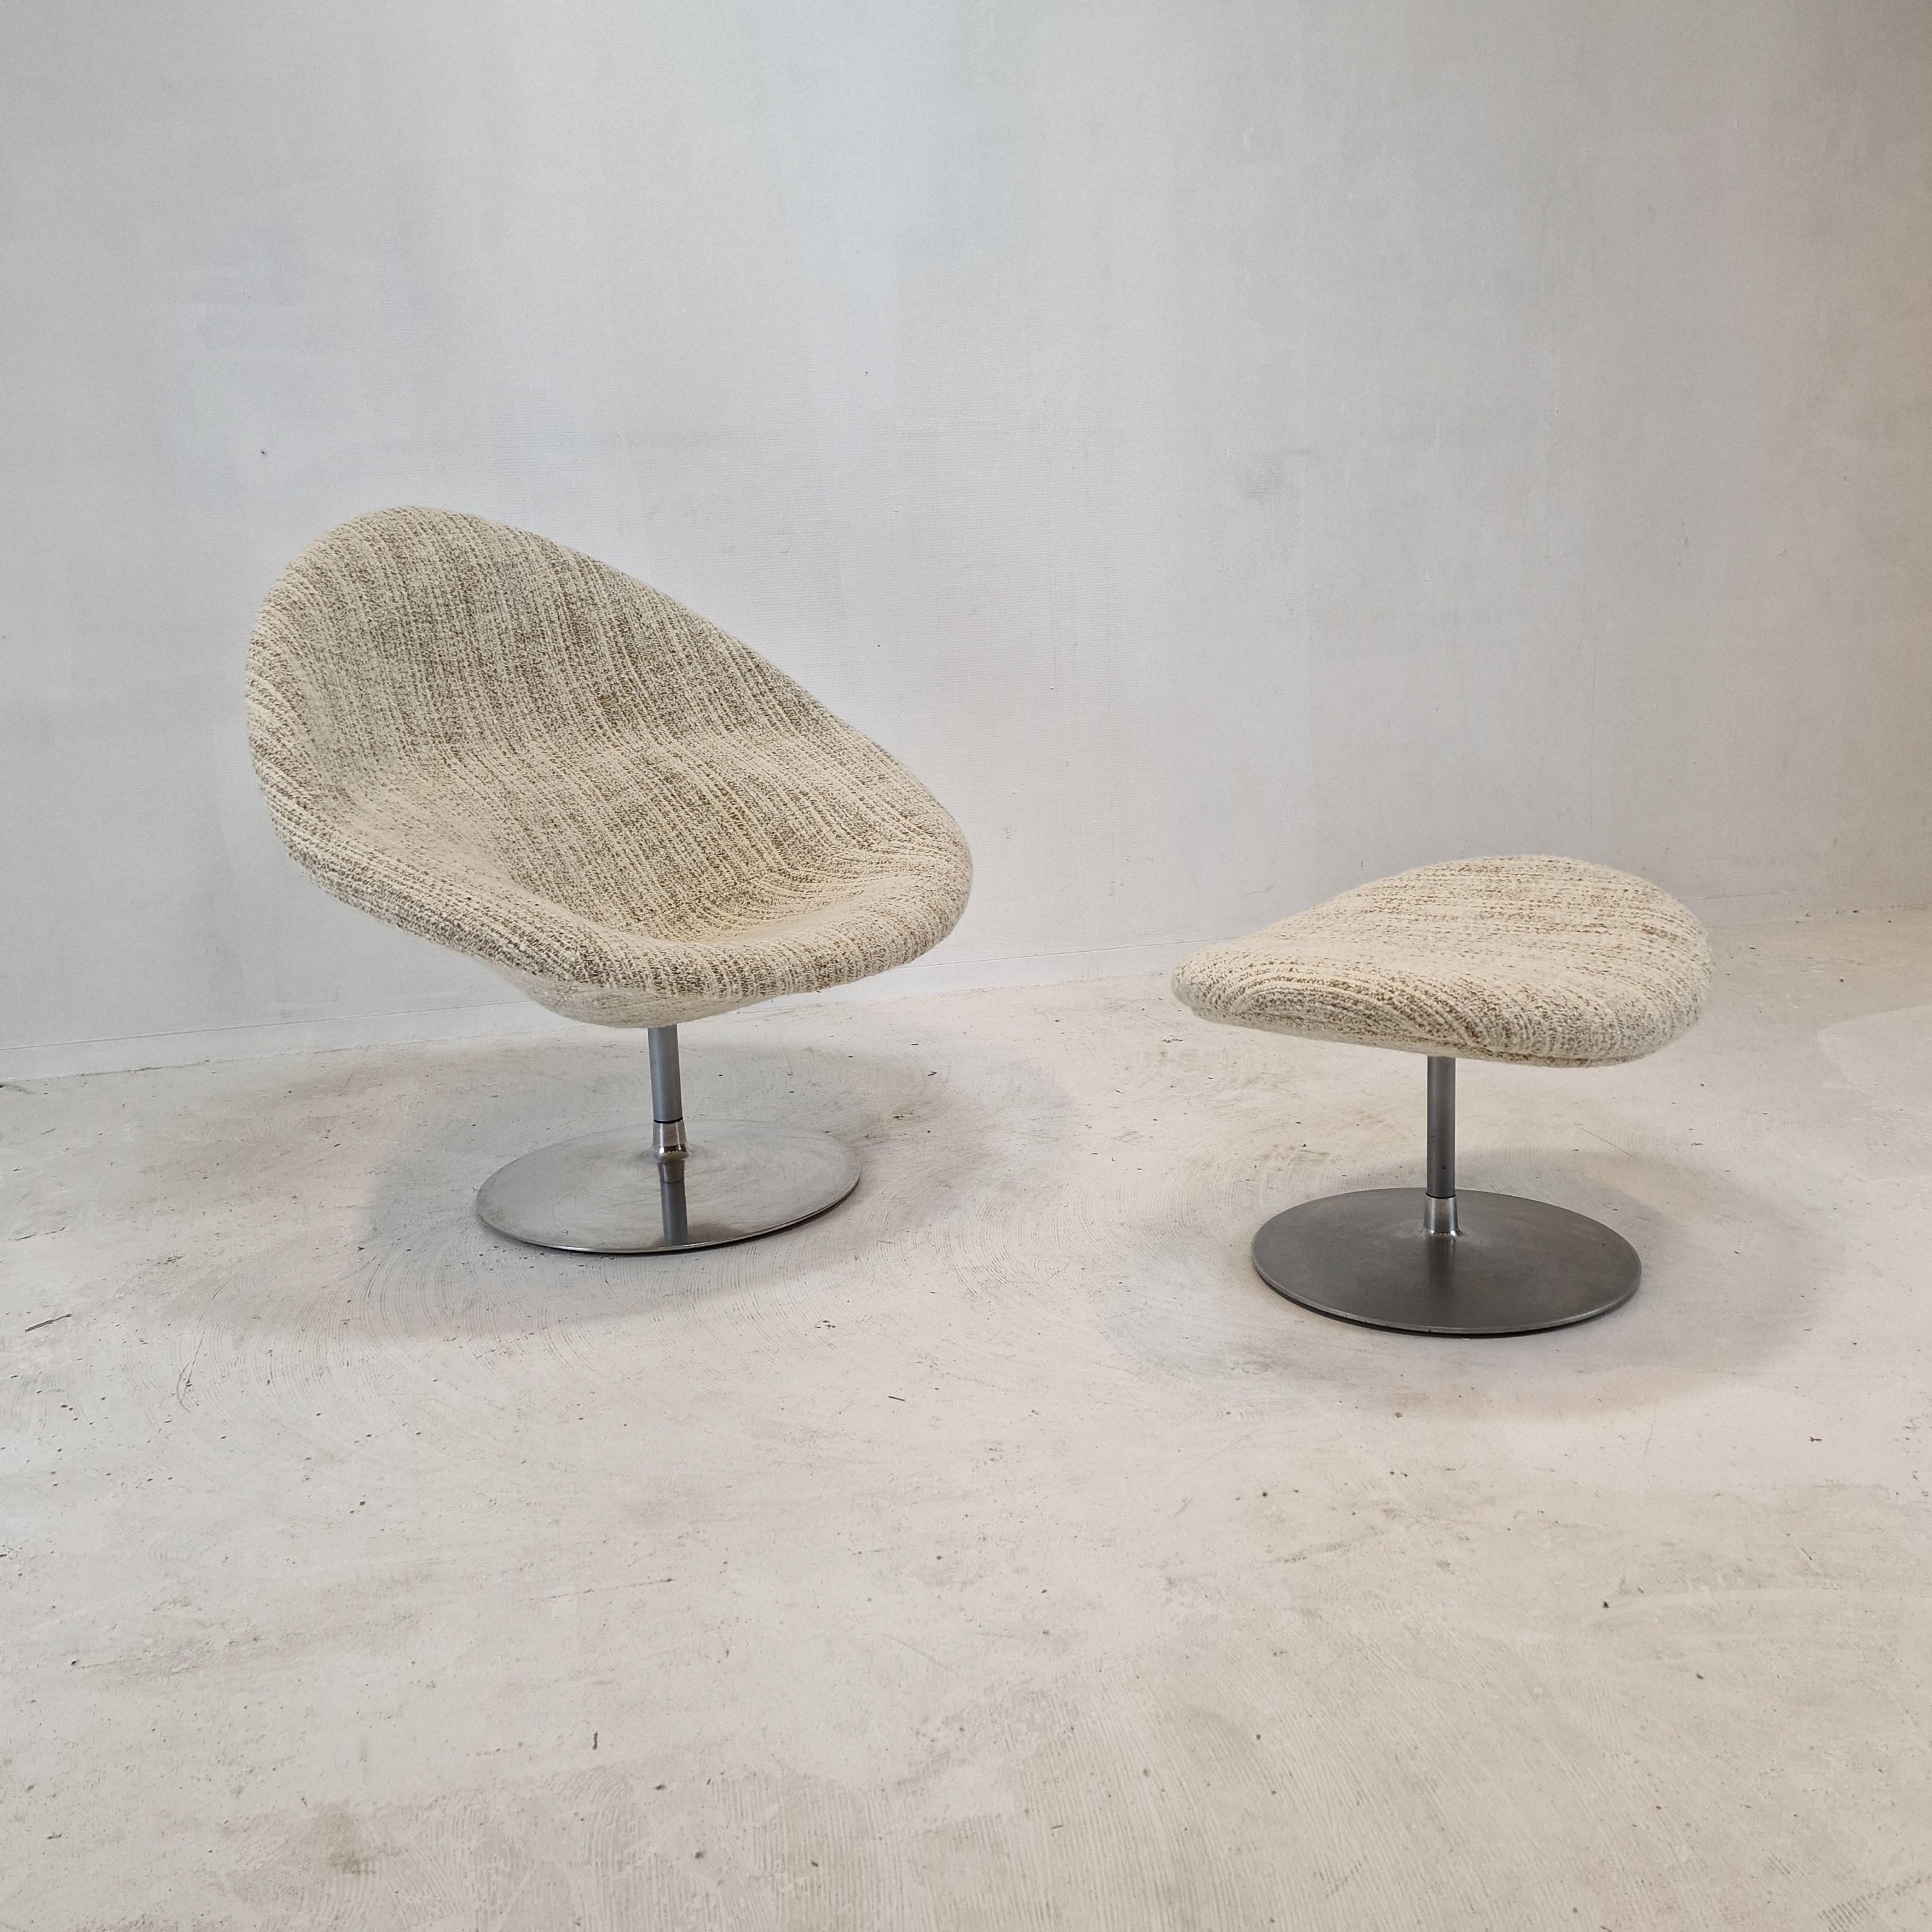 Very comfortable and turnable Big Globe Lounge Chair with Ottoman.
The Globe Chair is designed by Pierre Paulin for Artifort in 1959, this particular set is fabricated in the 1970s.

The chair is just reupholstered with high quality Dedar wool